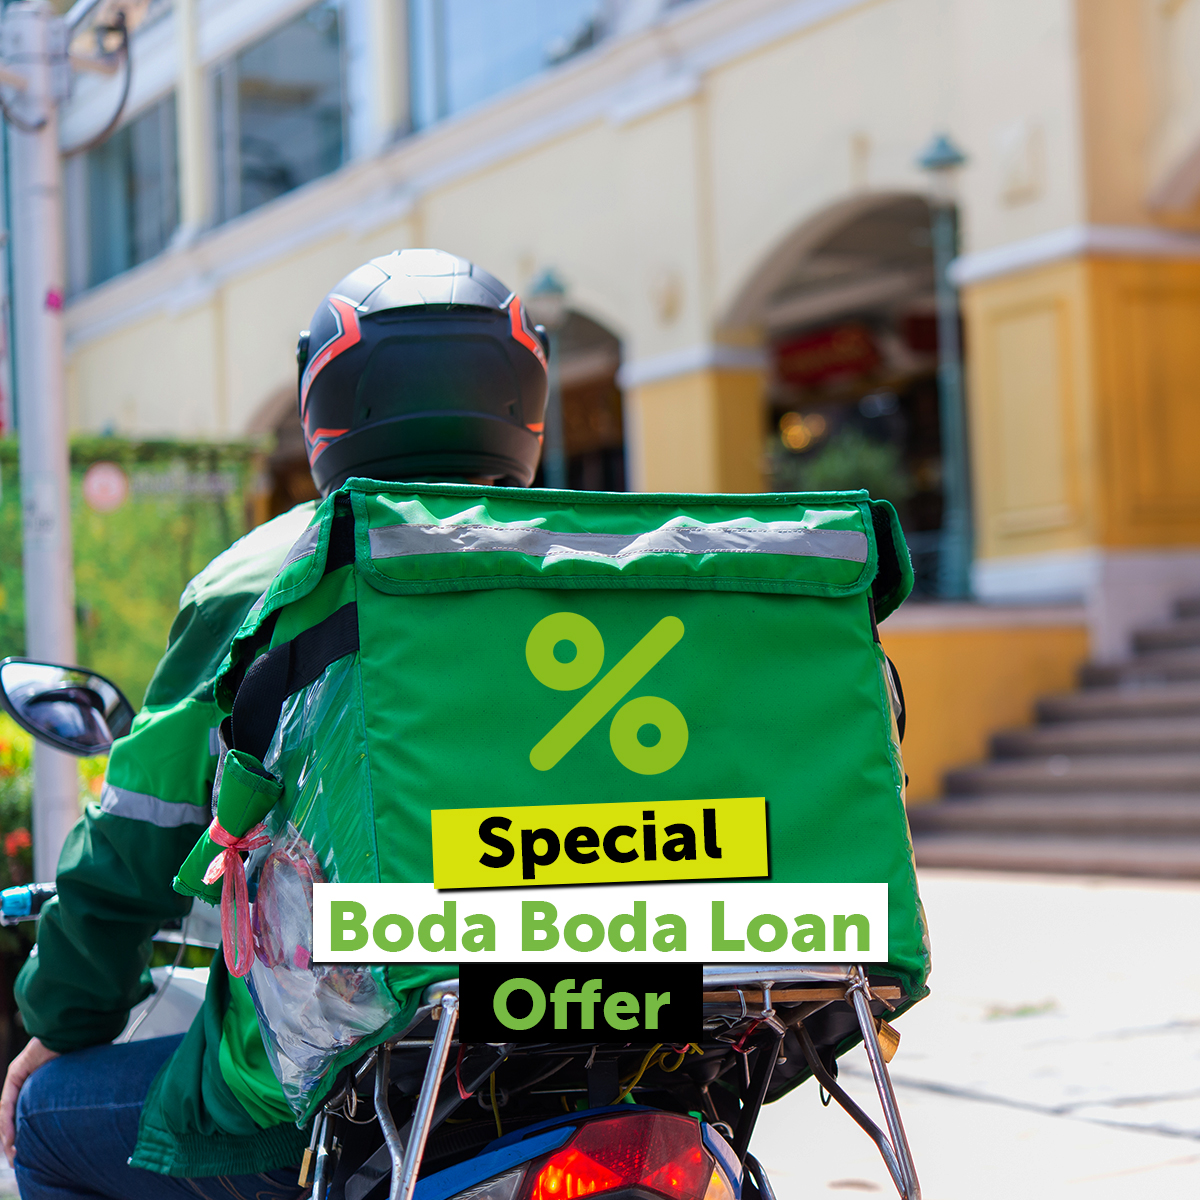 To get a special offer only for Bolt, Uber, Glovo riders you need to: